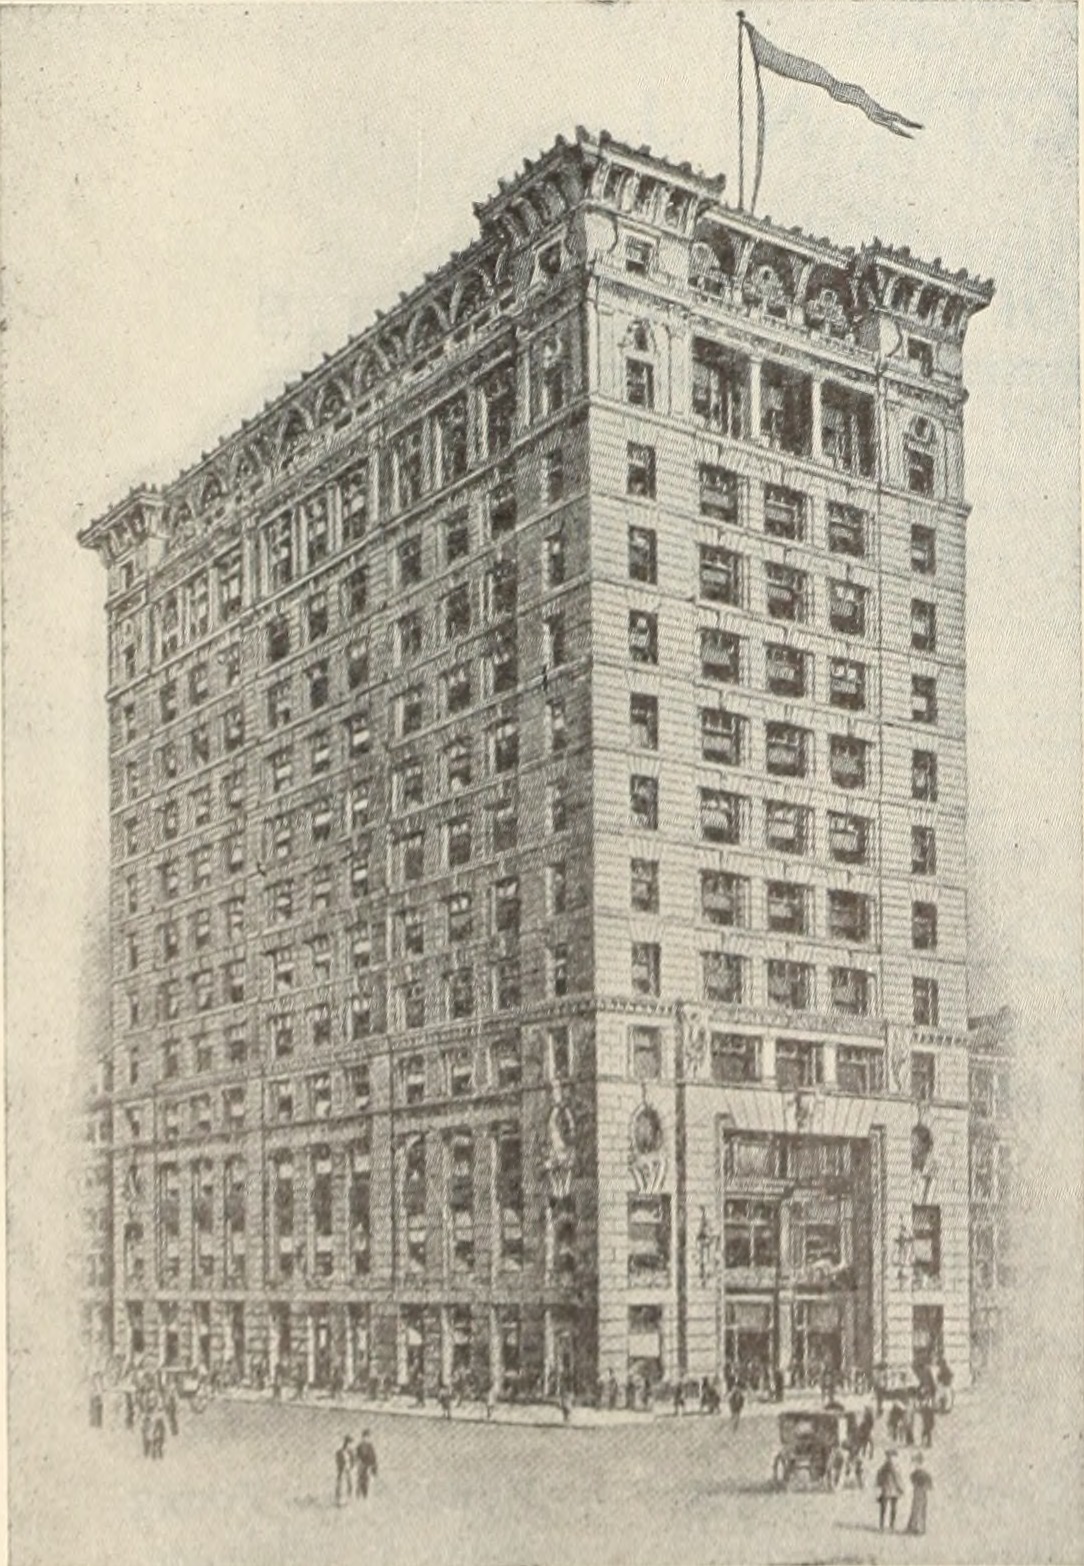 Image from page 1115 of "The Commercial and financial chronicle" (1908)